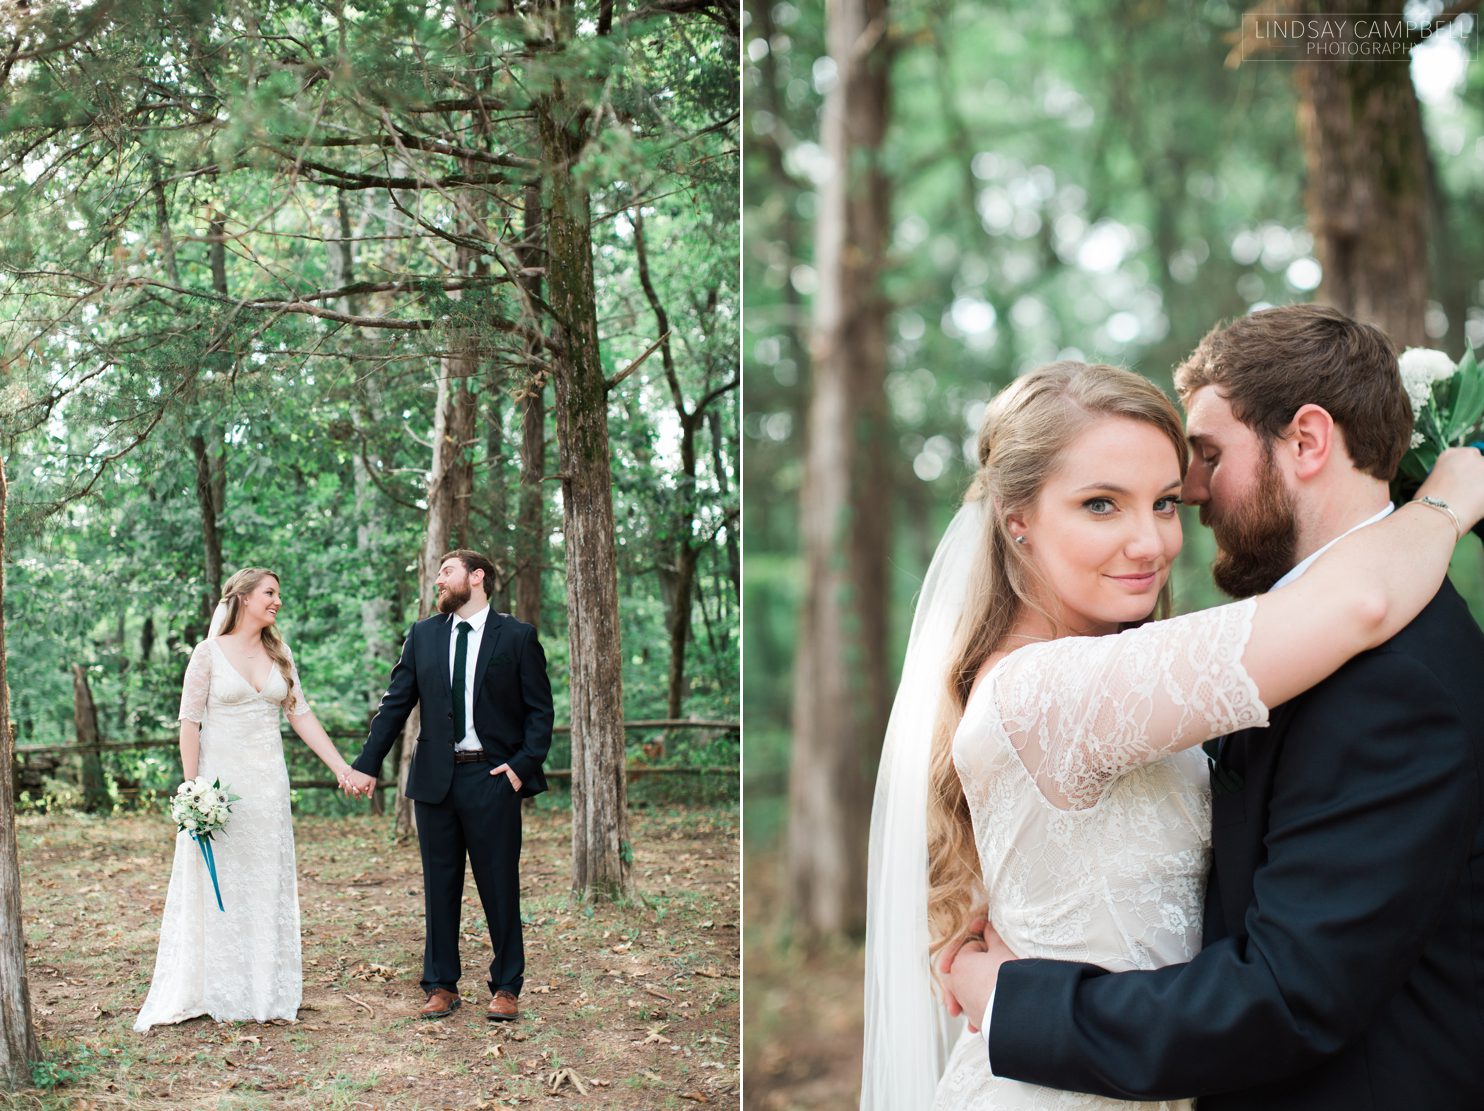 Taylor-and-Andrew-Nashville-Wooded-Wedding-Cedars-of-Lebanon-State-Park-Wedding-Photos_0050 Taylor + Andrew's Geode-Themed Lodge Wedding in the Woods